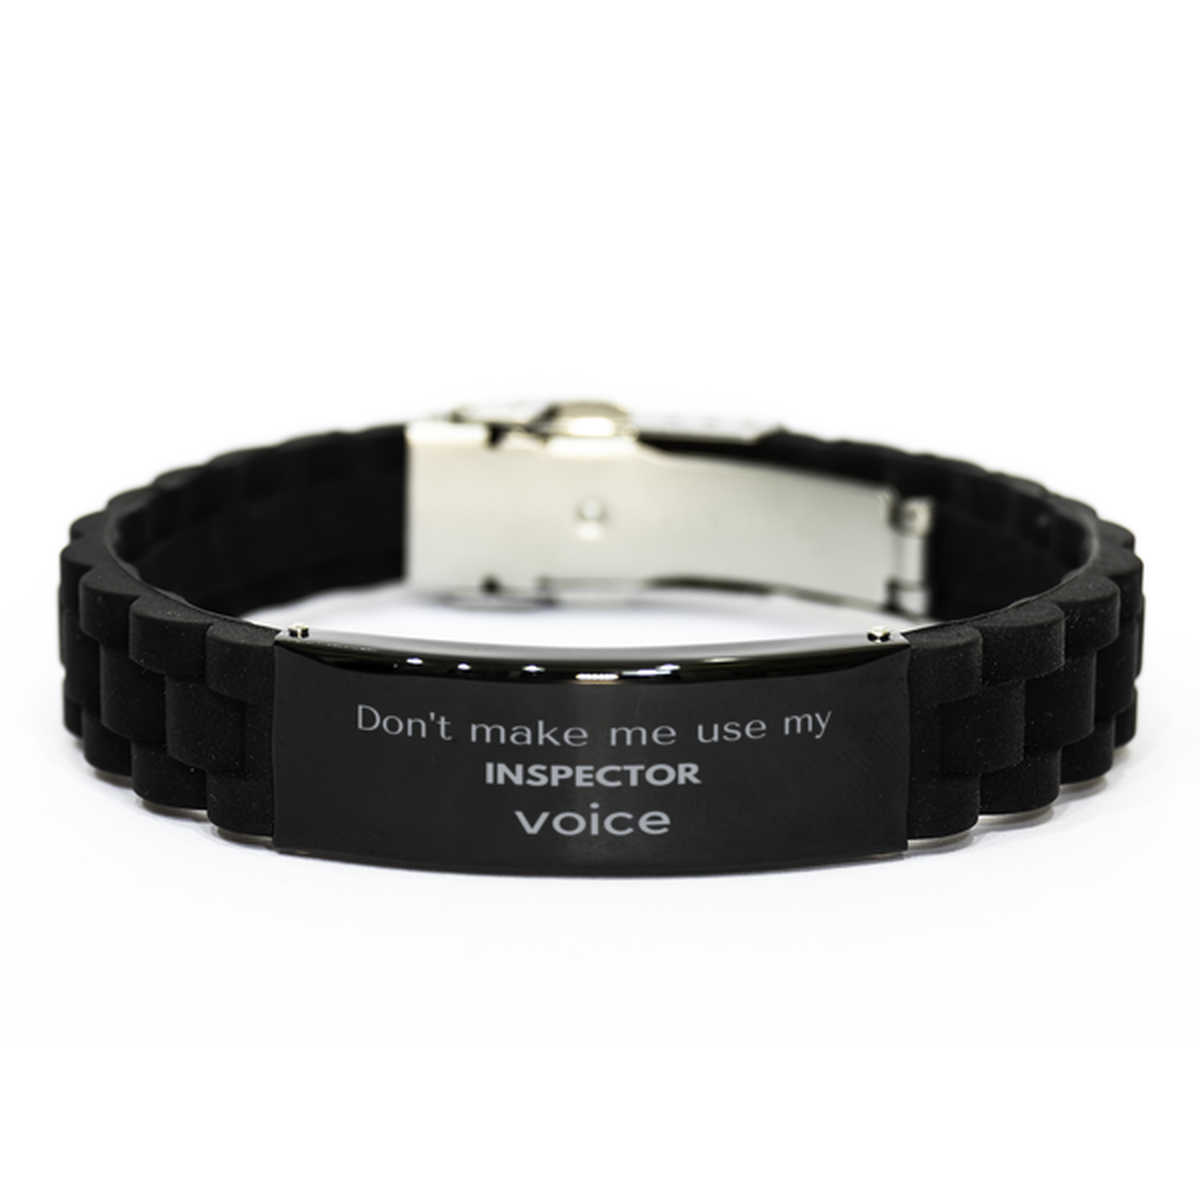 Don't make me use my Inspector voice, Sarcasm Inspector Gifts, Christmas Inspector Black Glidelock Clasp Bracelet Birthday Unique Gifts For Inspector Coworkers, Men, Women, Colleague, Friends